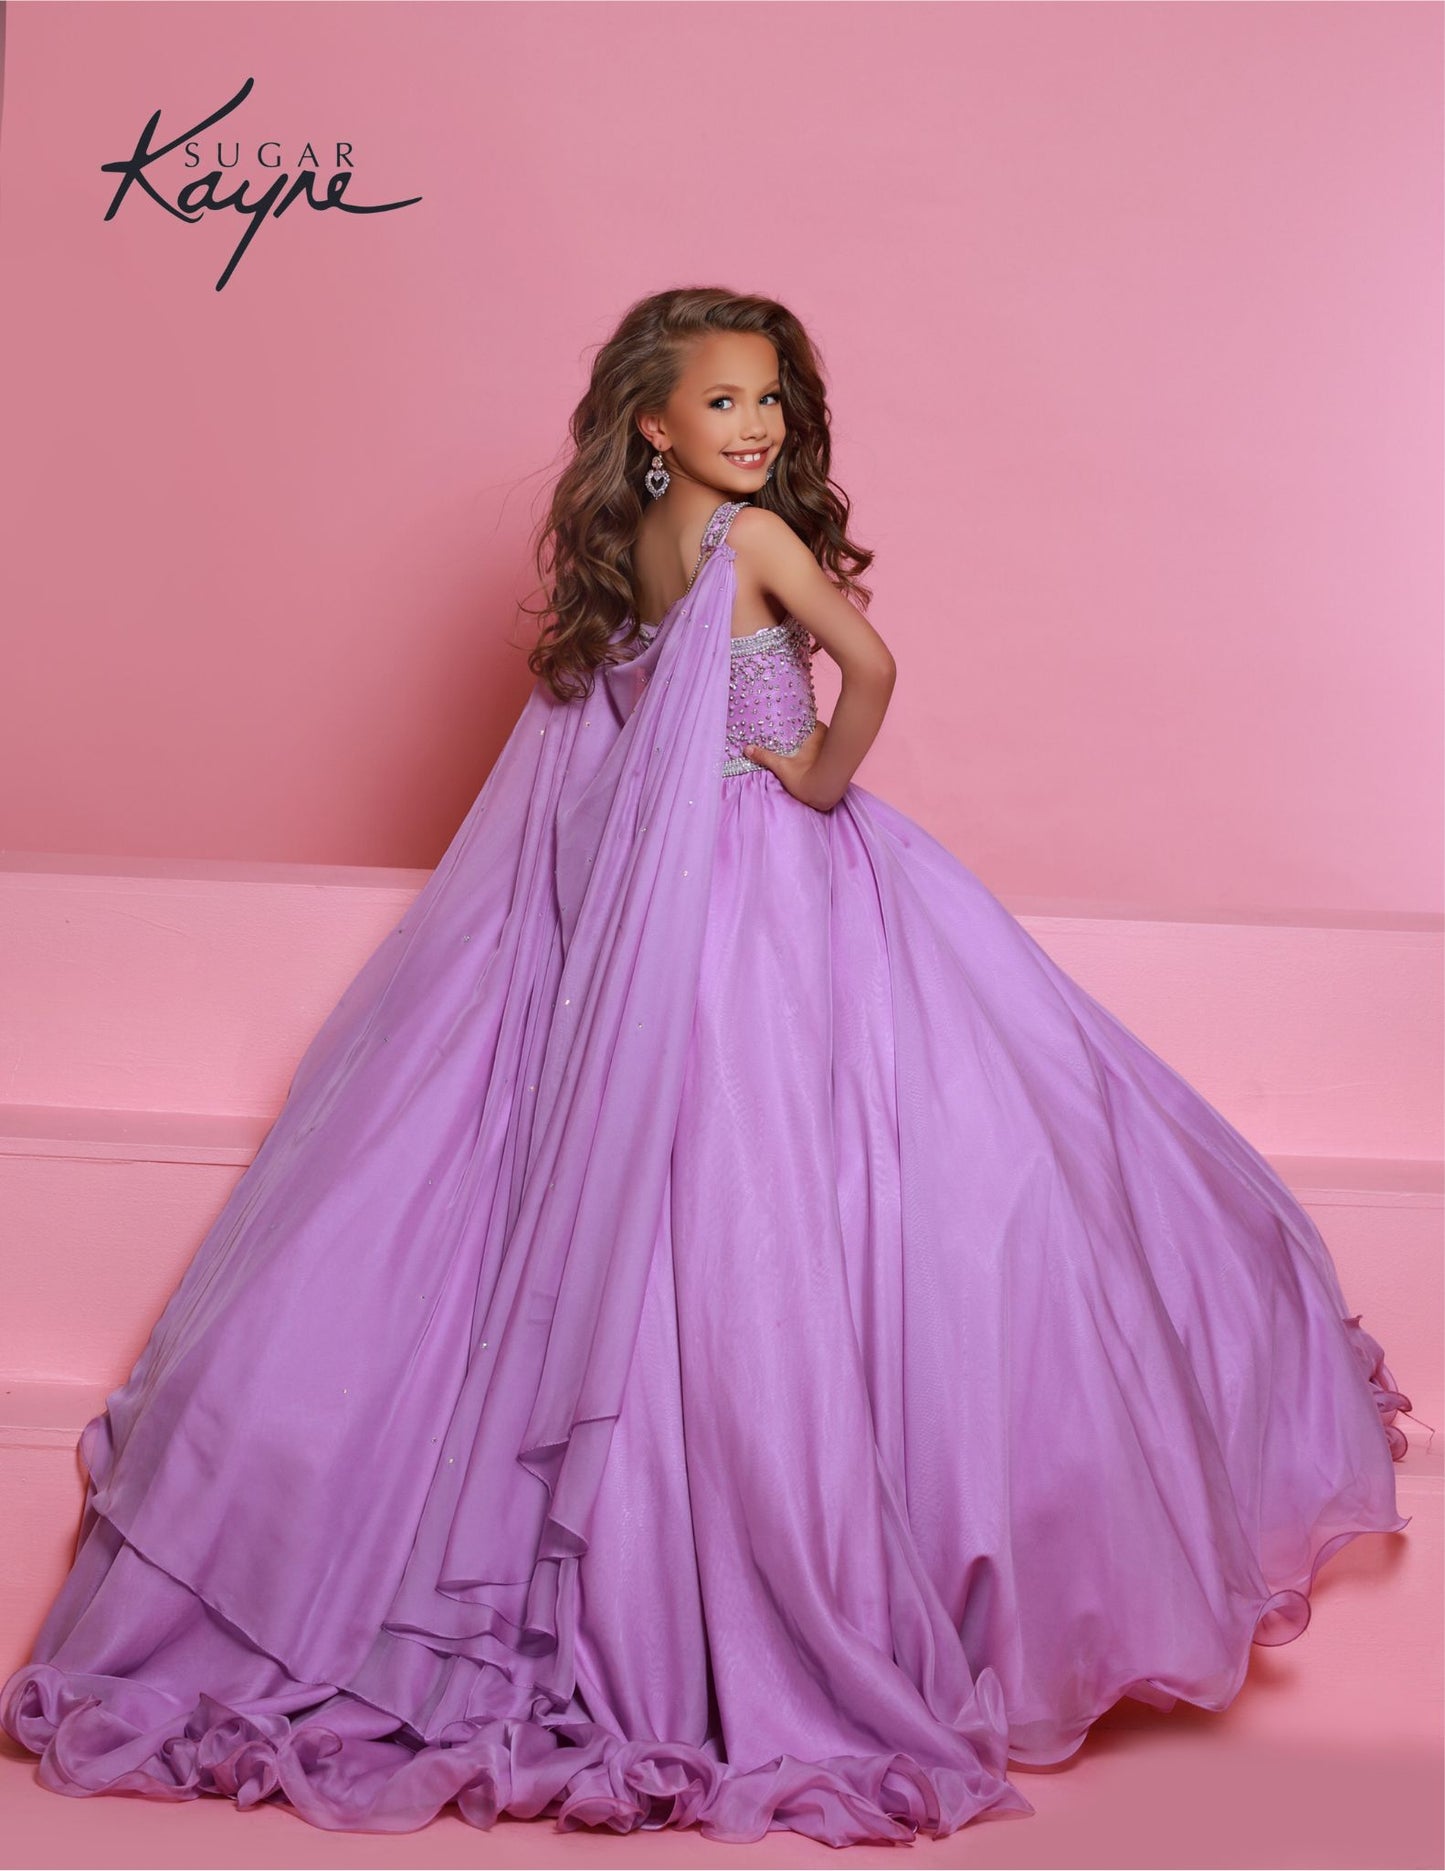 Sugar Kayne C329 Lilac Pageant Dress features a chiffon skirt, semi sweetheart neckline encrusted with rhinestones and wide straps with a cape.